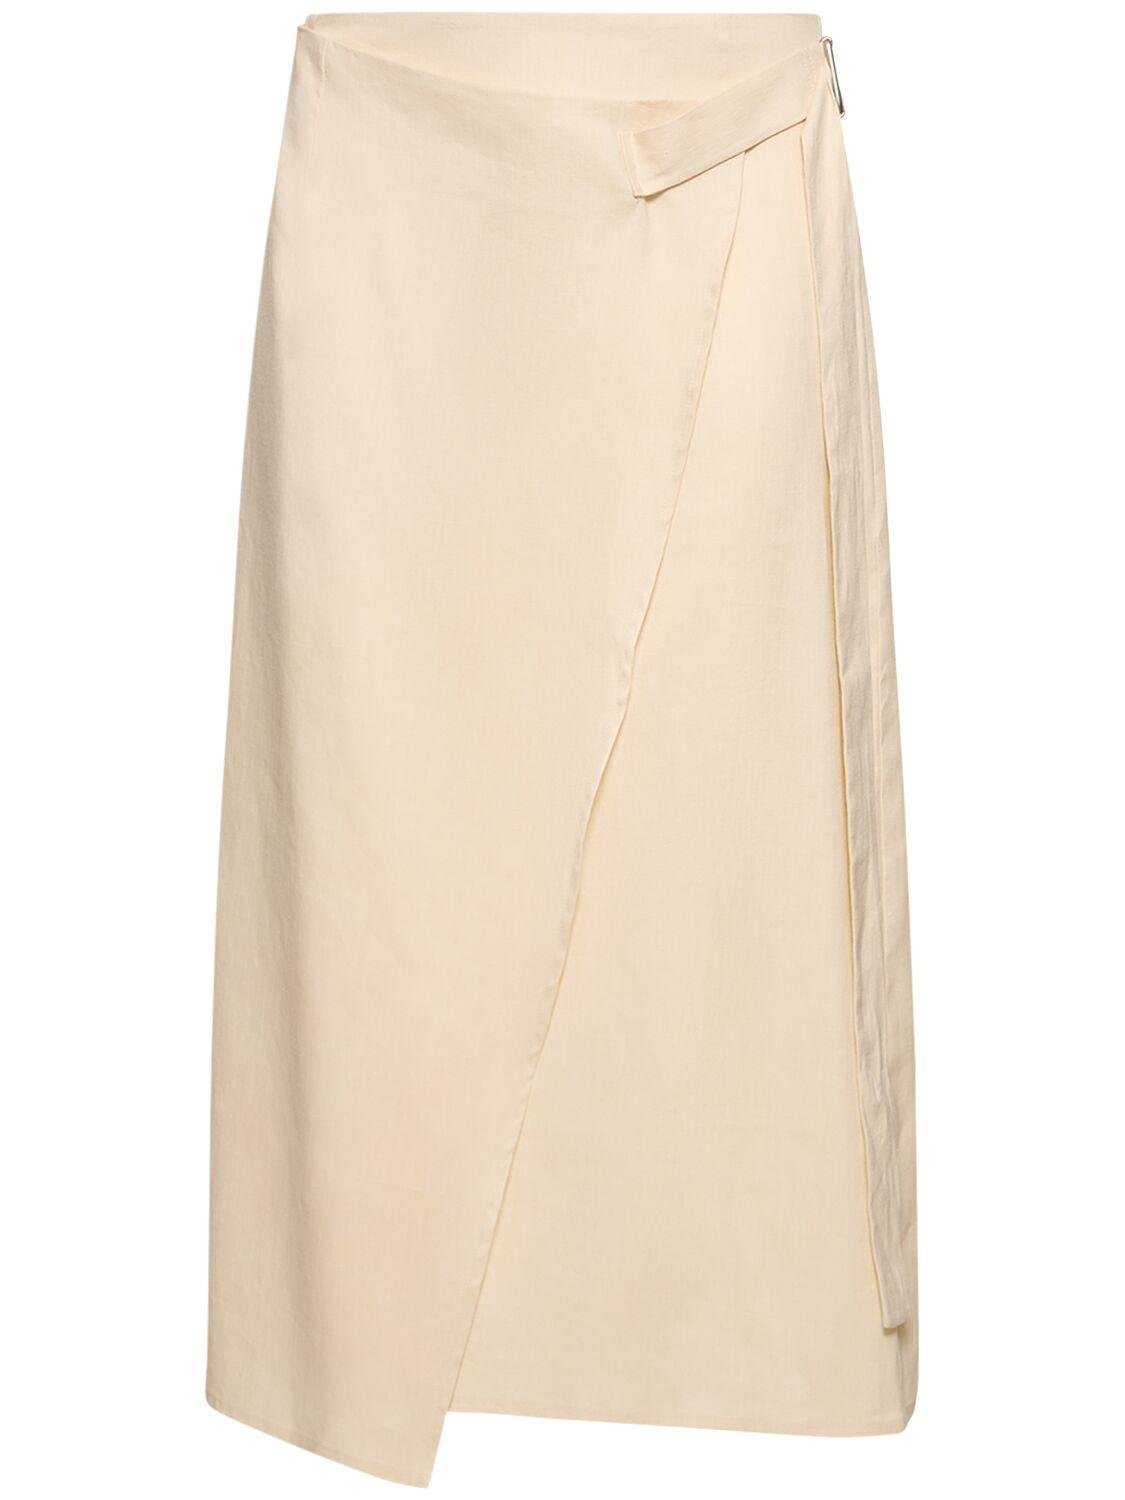 Tailored Sarong Skirt by COMMAS